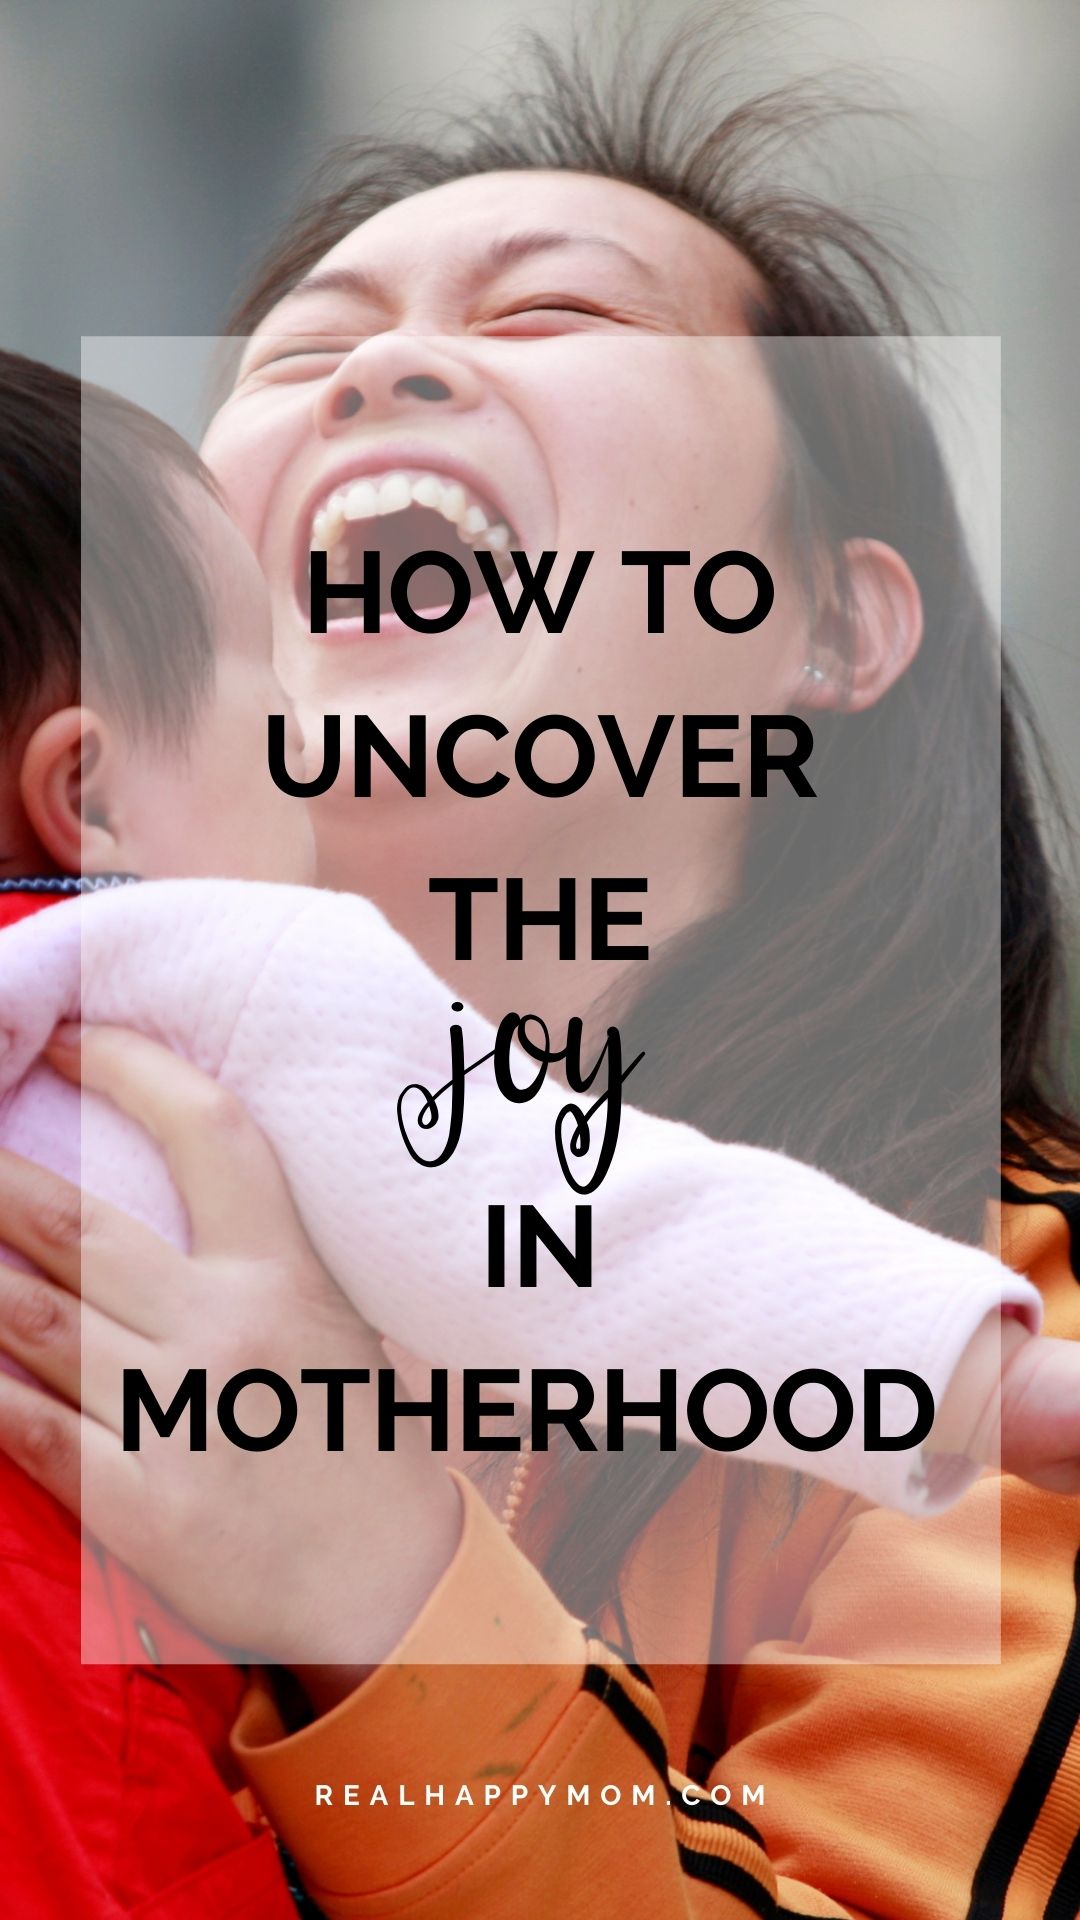 How to Uncover the Joy in Motherhood